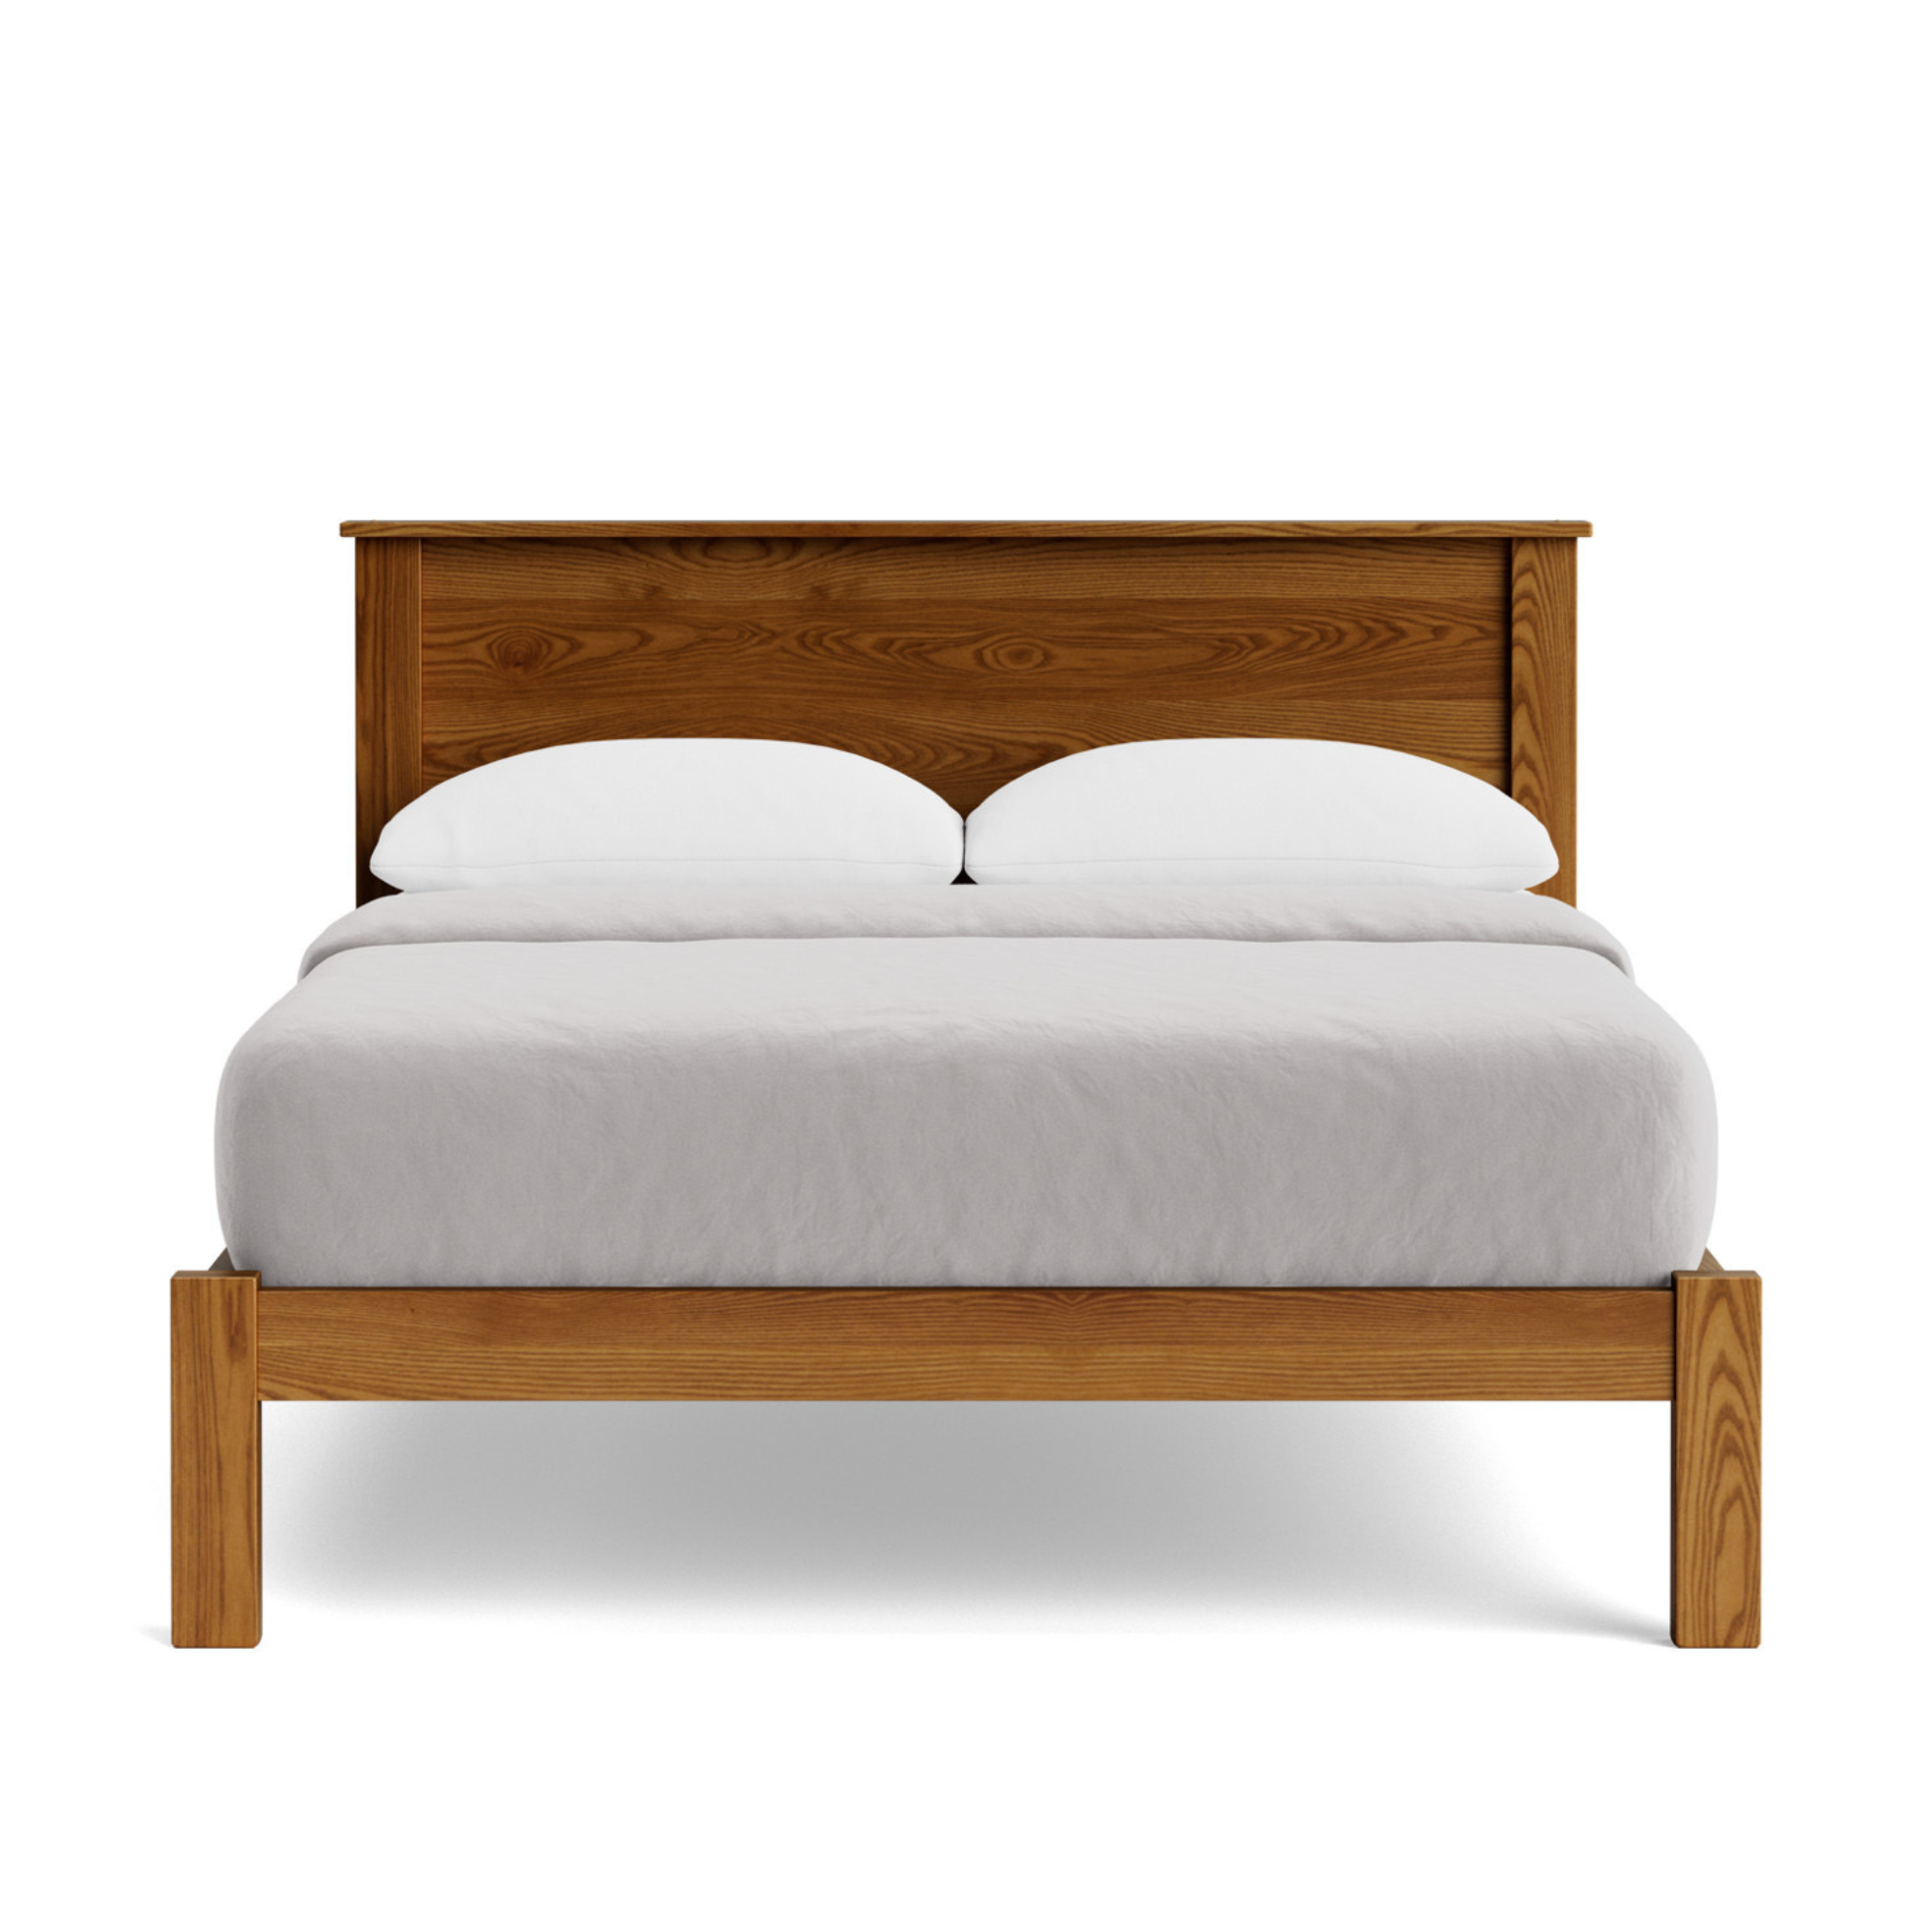 IVYDALE LOW FOOT SLAT BED | PINE OR AMERICAN ASH | ALL SIZES |NZ MADE